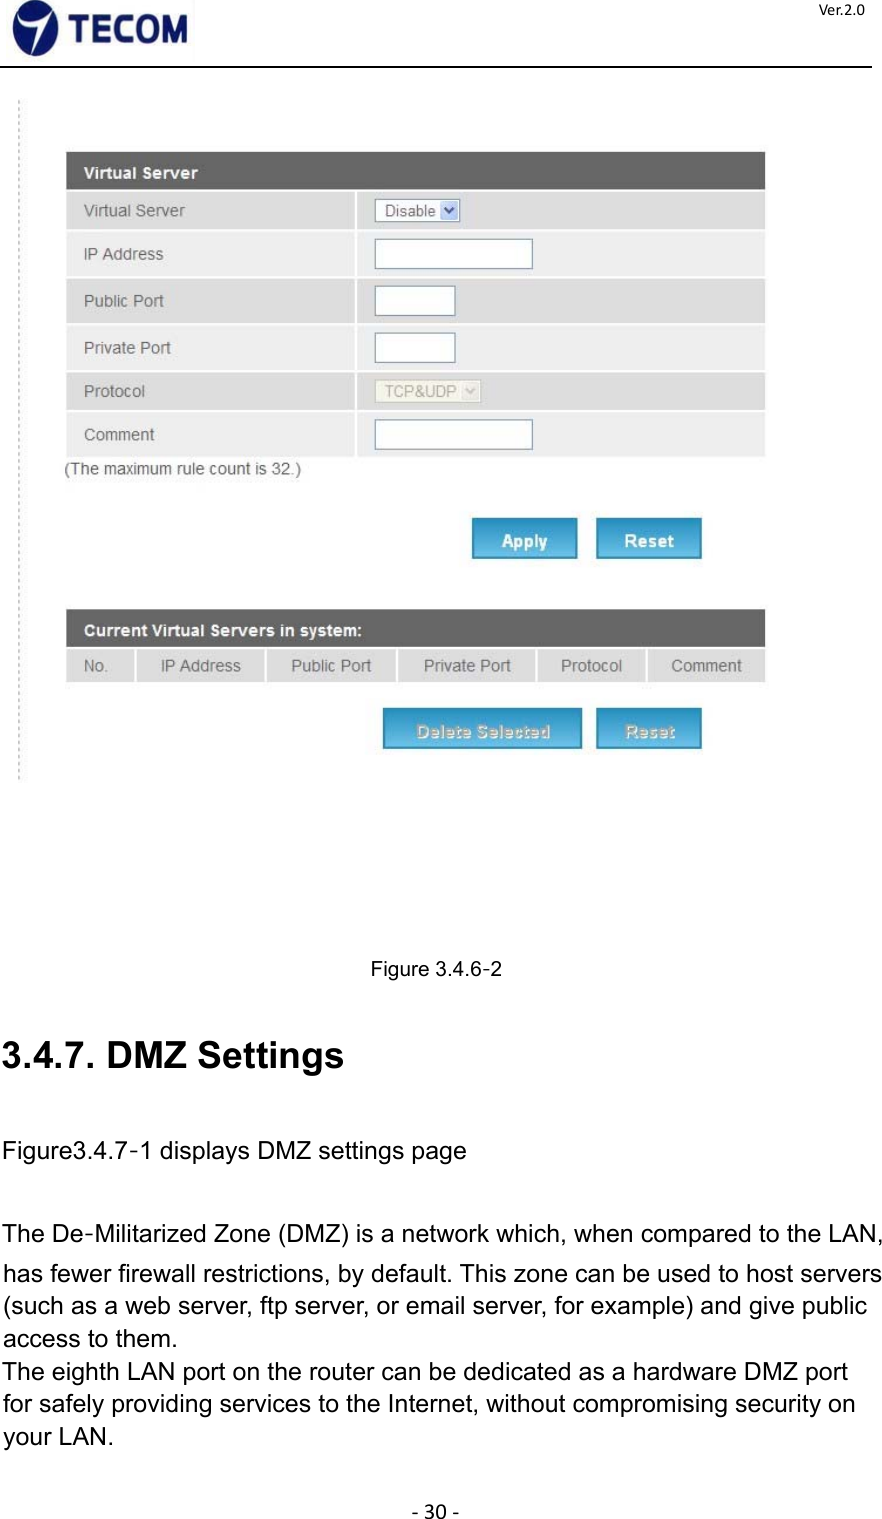  ‐30‐Ver.2.0            Figure 3.4.6‐2    3.4.7. DMZ Settings    Figure3.4.7‐1 displays DMZ settings page    The De‐Militarized Zone (DMZ) is a network which, when compared to the LAN, has fewer firewall restrictions, by default. This zone can be used to host servers (such as a web server, ftp server, or email server, for example) and give public access to them.  The eighth LAN port on the router can be dedicated as a hardware DMZ port for safely providing services to the Internet, without compromising security on your LAN.    